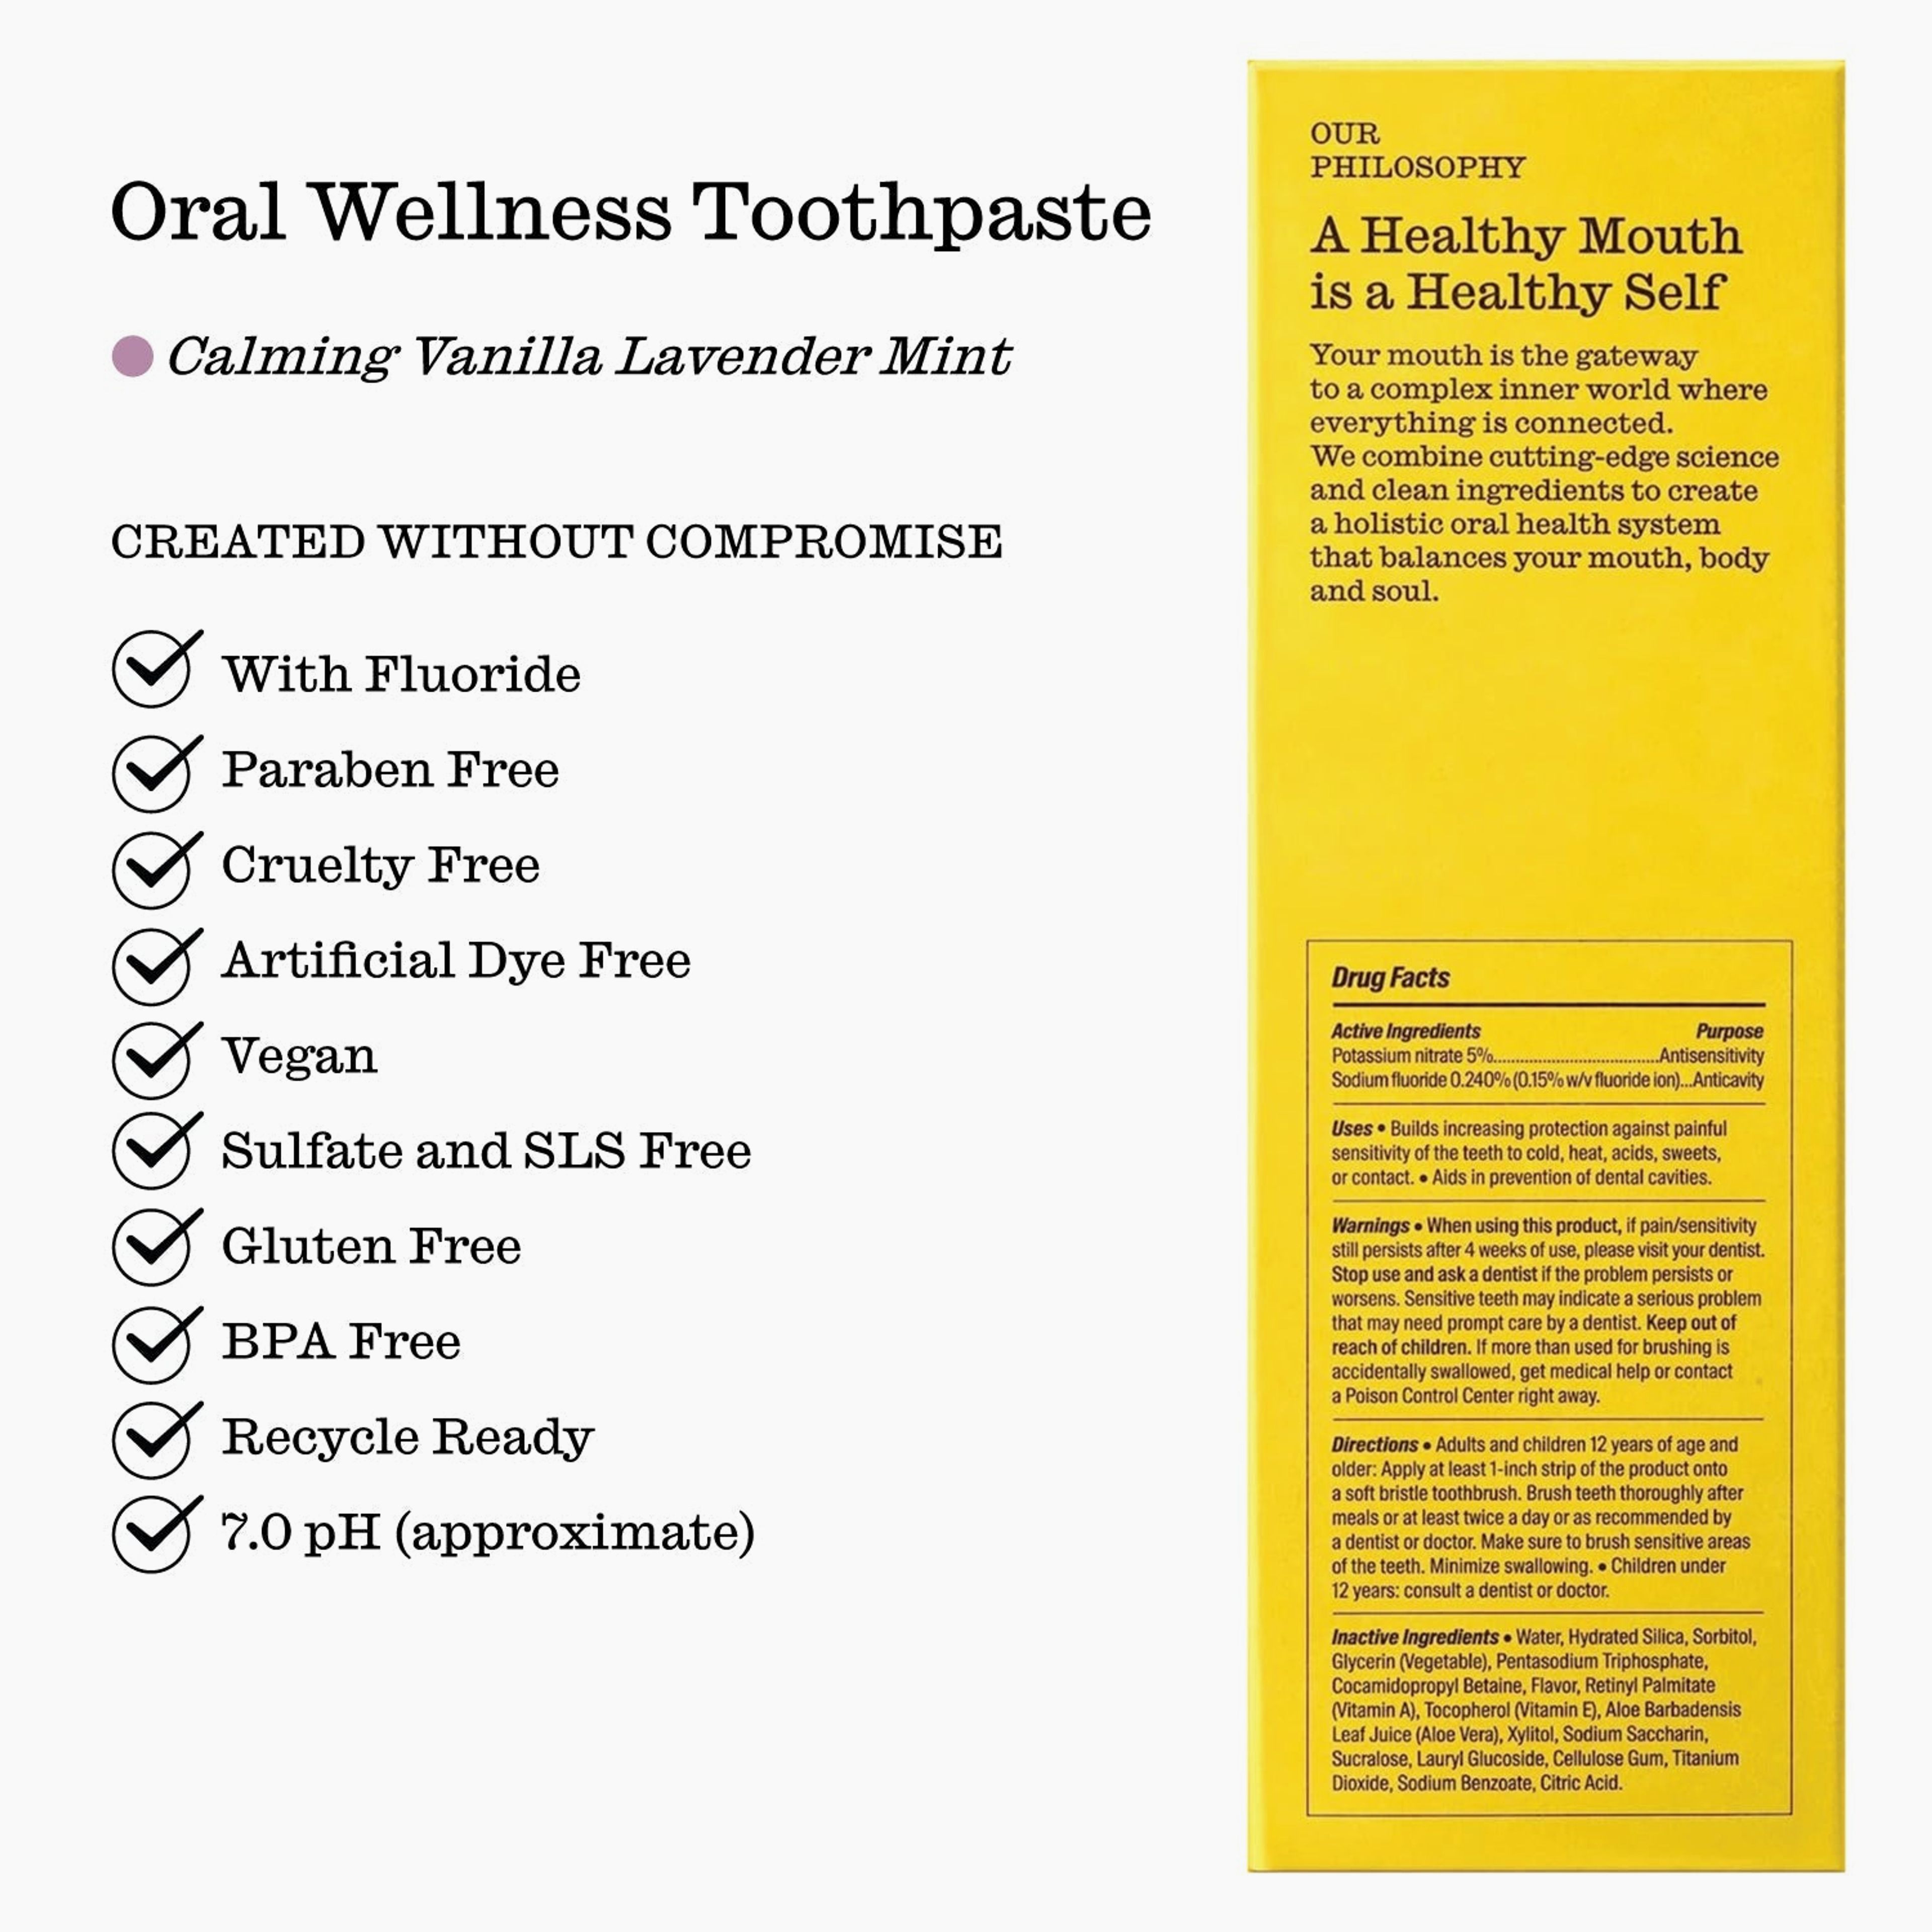 Oral Wellness Toothpaste with Fluoride